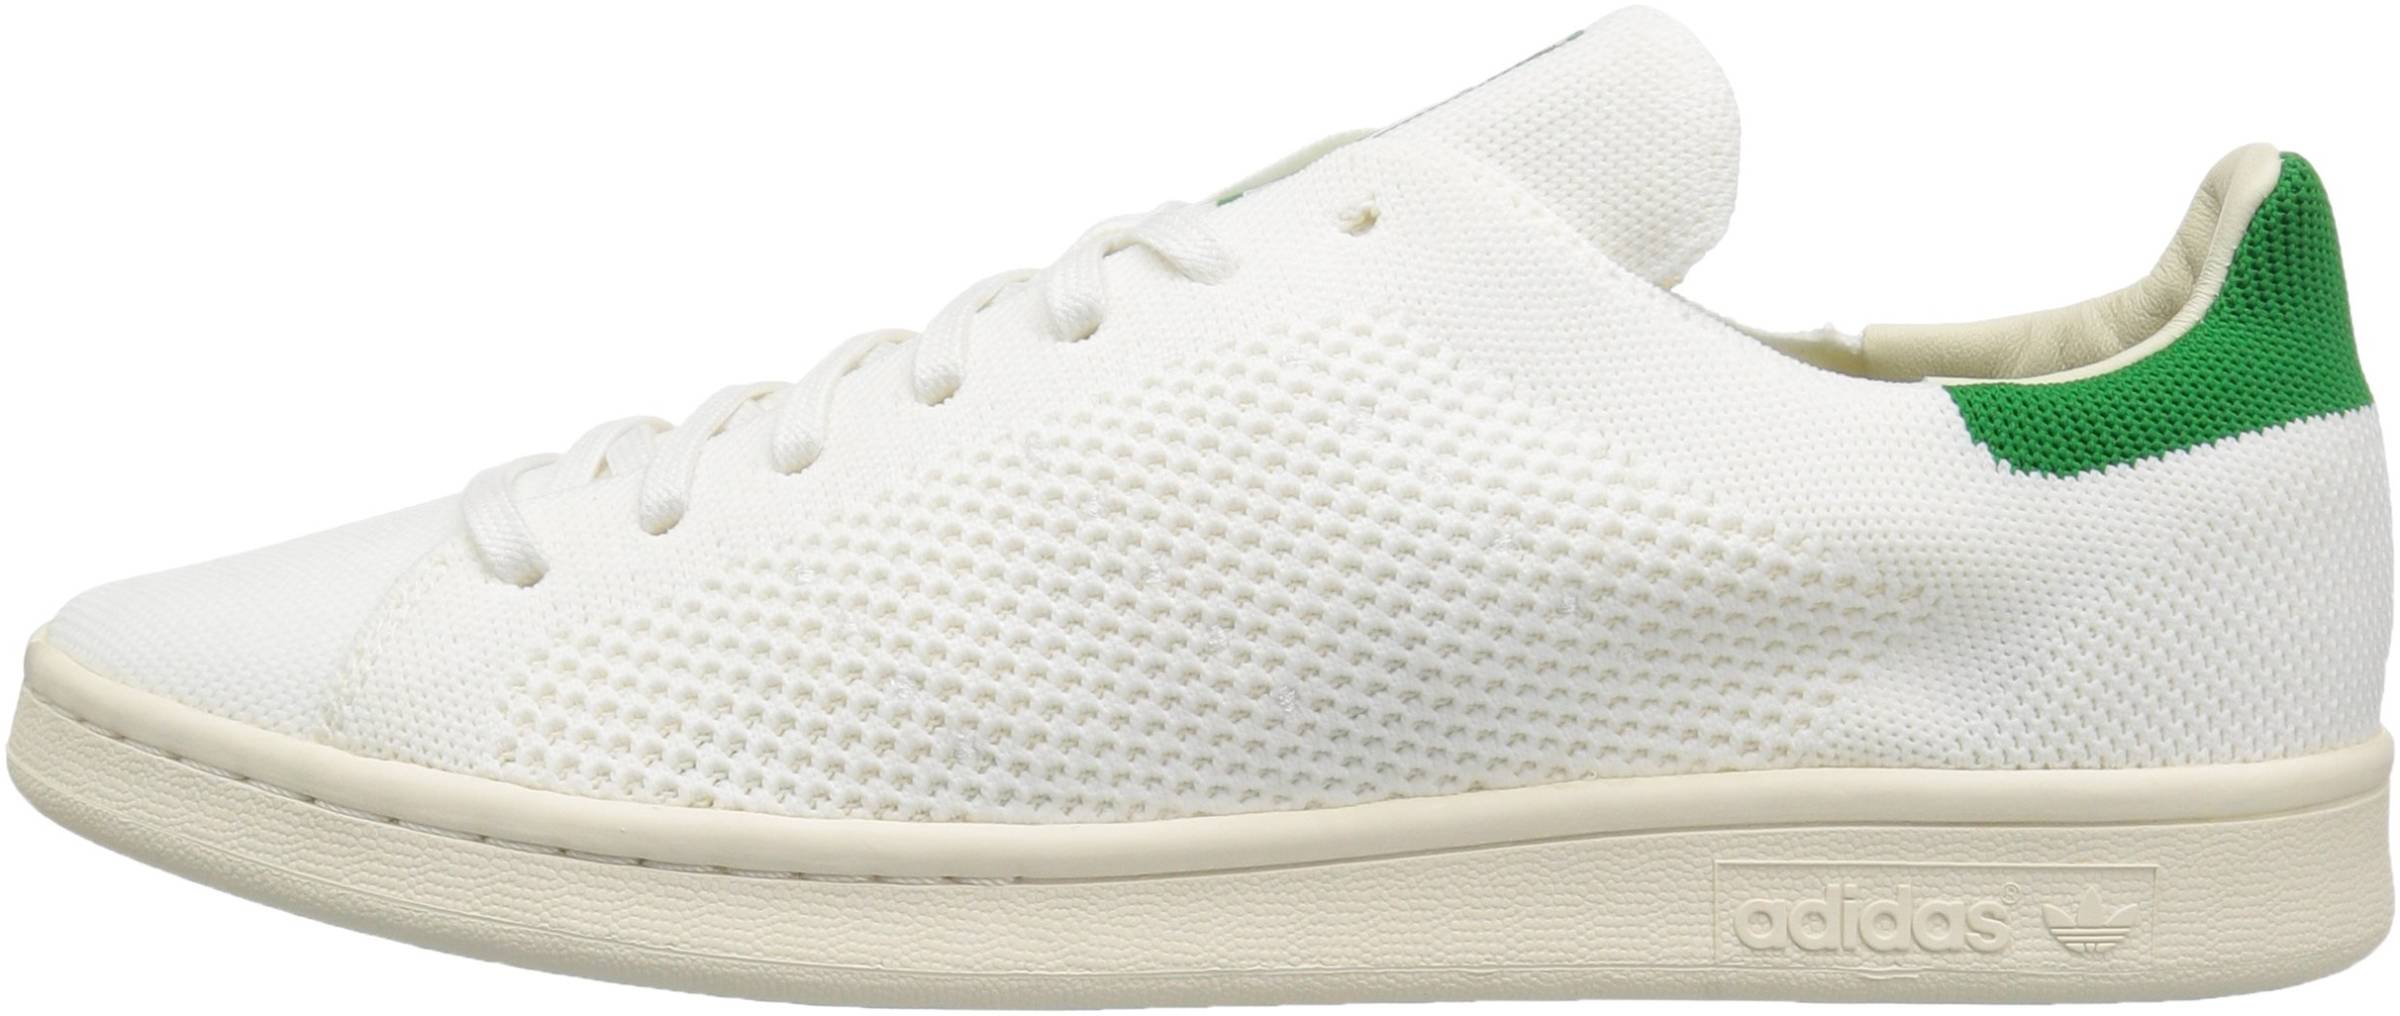 Rarely reservoir Puno Adidas Stan Smith Primeknit sneakers in 9 colors (only $45) | RunRepeat